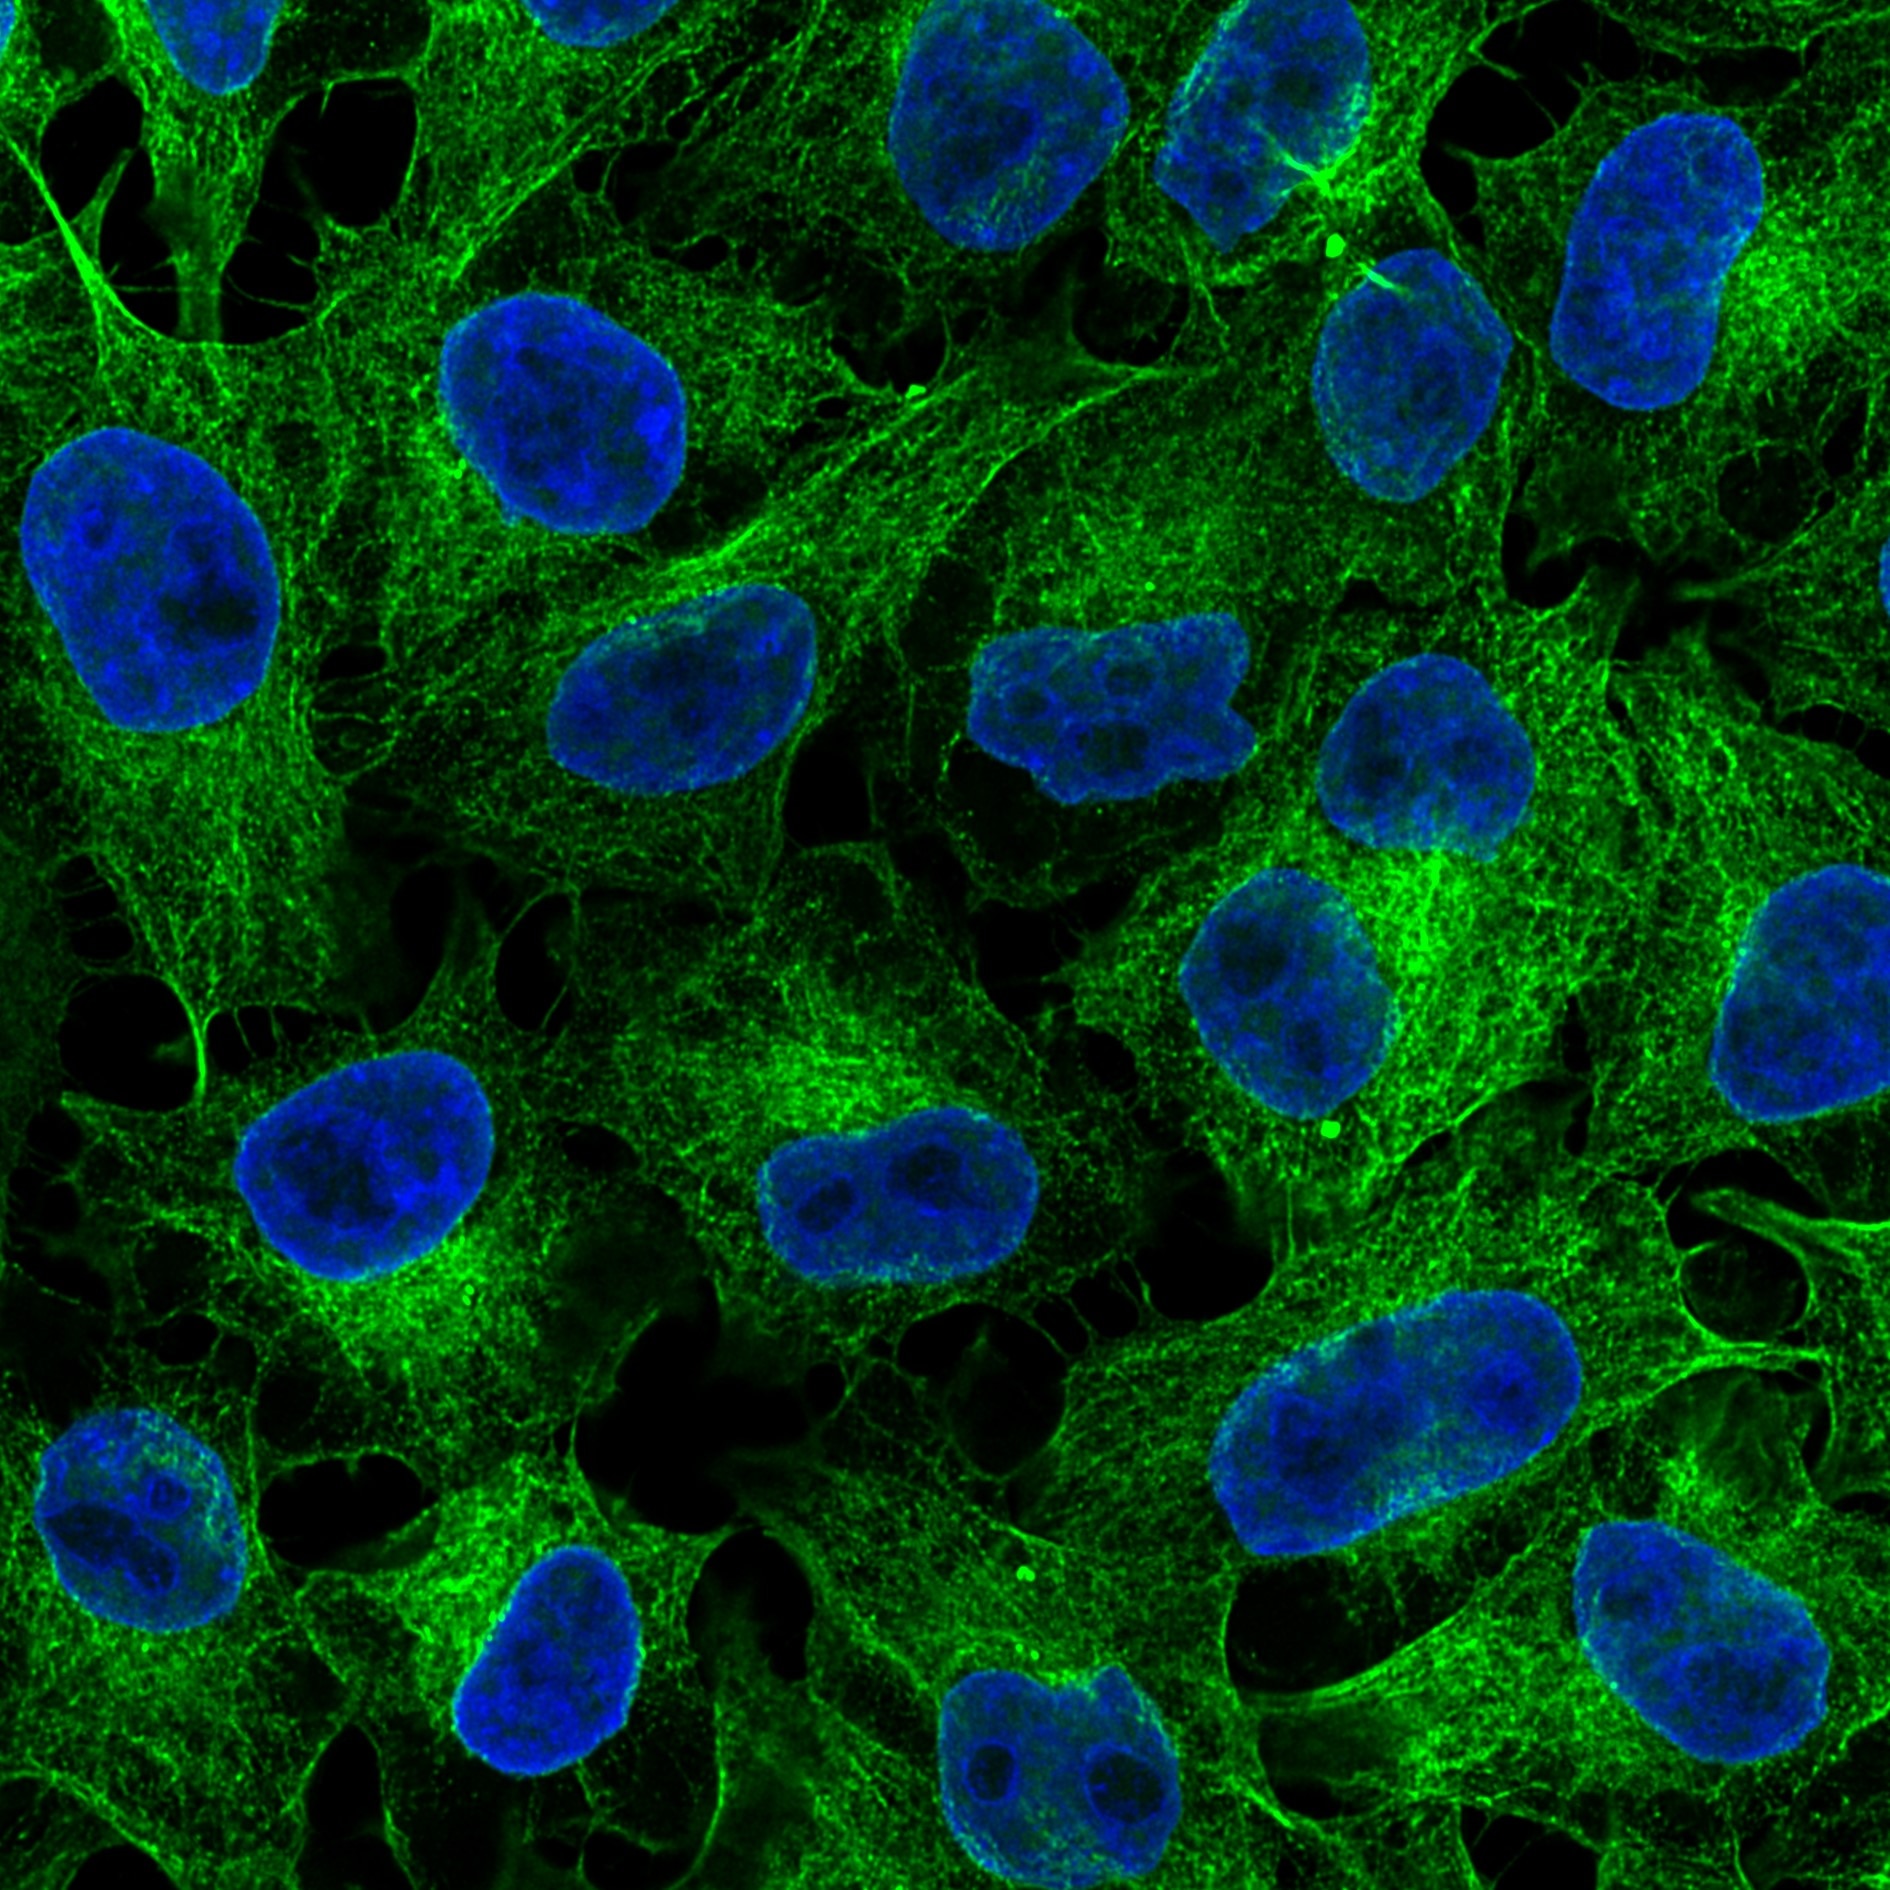 Immunofluorescence analysis of HeLa cells stained with mouse IgG2b anti-tubulin beta antibody and Nano-Secondary® alpaca anti-mouse IgG2b, recombinant VHH, CoraLite® Plus 488 (smsG2bCL488-1, green). Nuclei were stained with DAPI (blue). Images were recorded at the Core Facility Bioimaging at the Biomedical Center, LMU Munich.